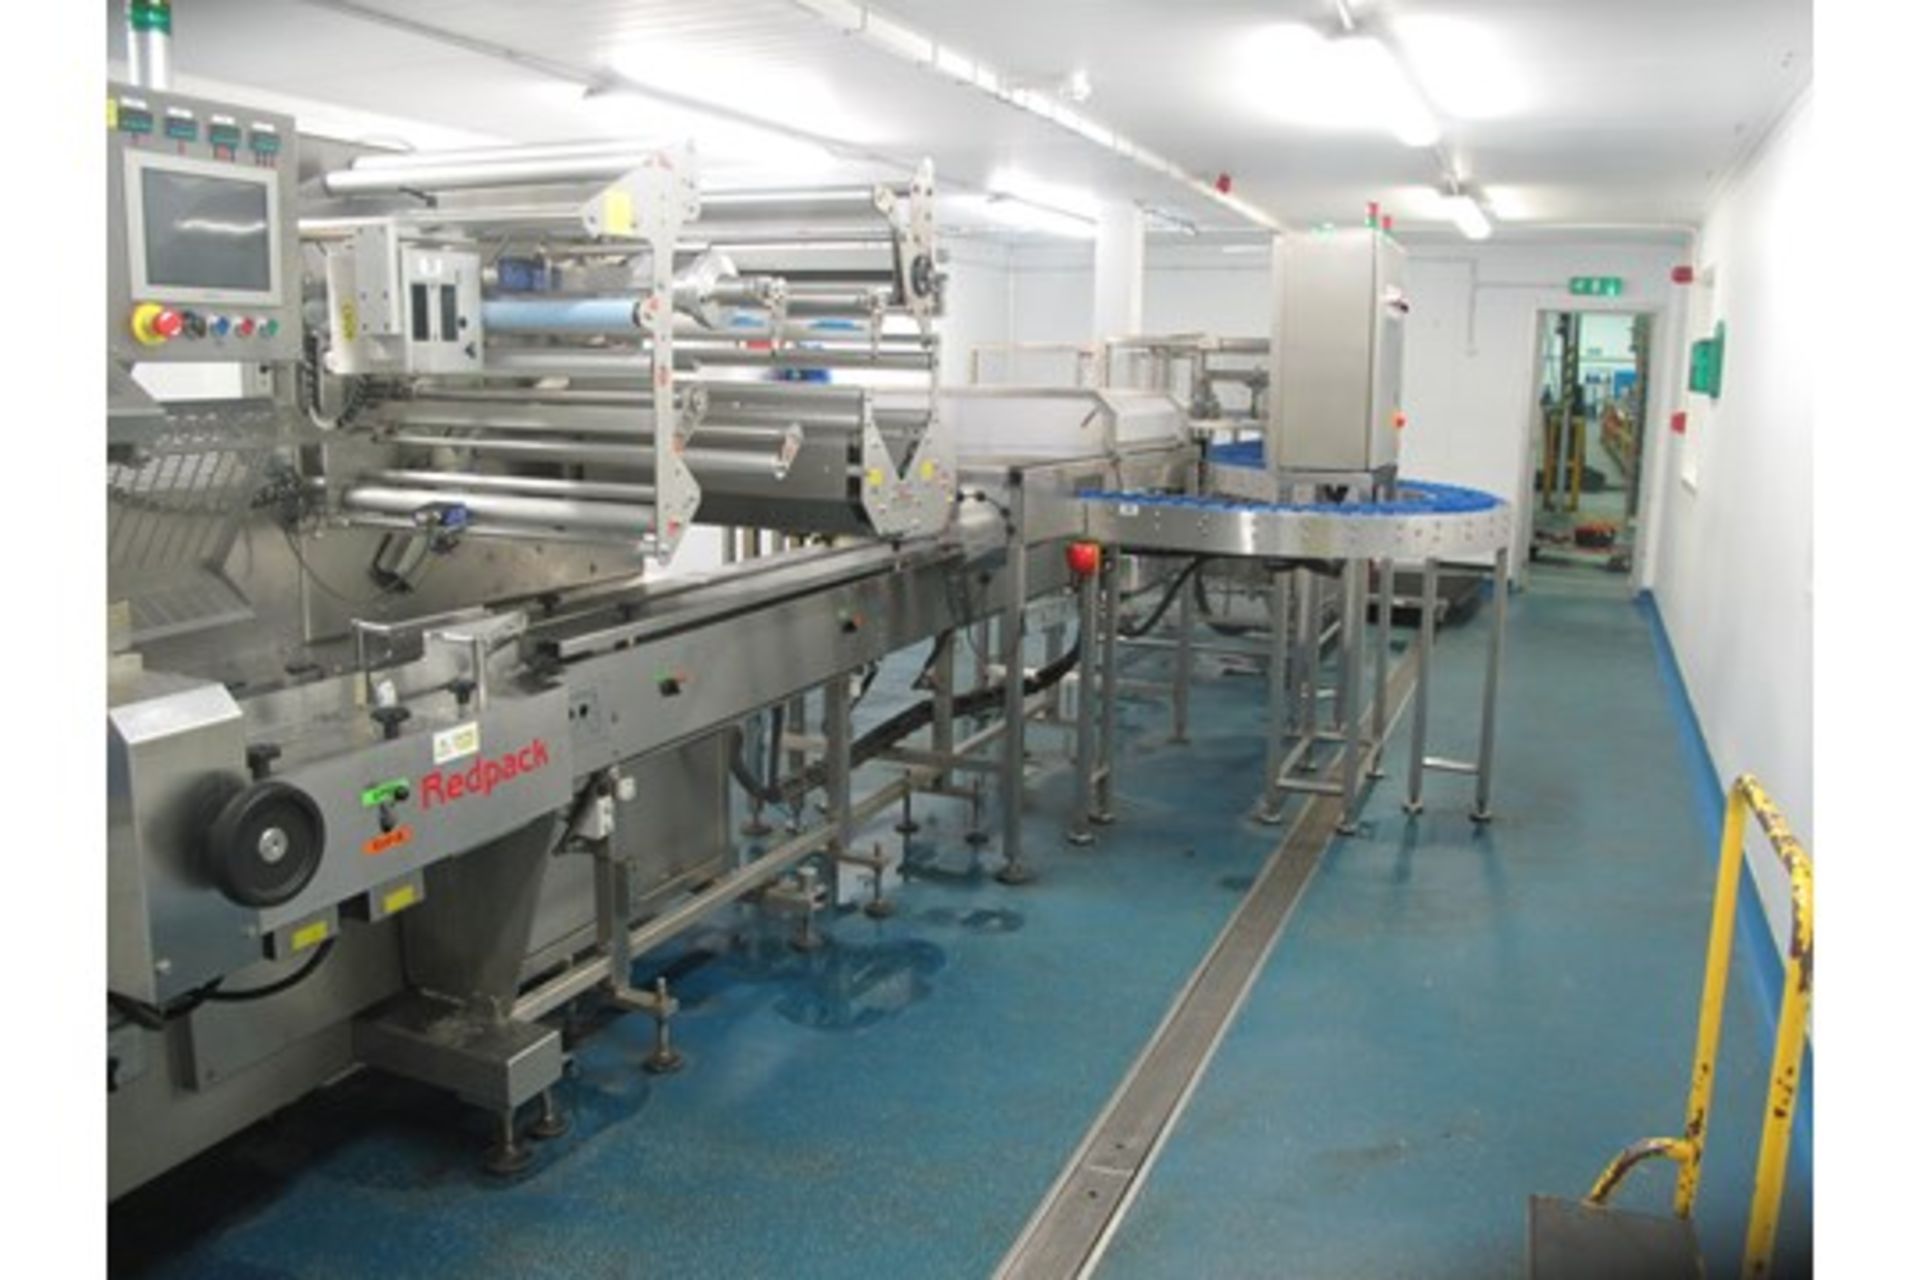 Complete cucumber cutting and packing line consists of: Redpack Flow-wrapper P325SP, twin spooling - Image 5 of 8